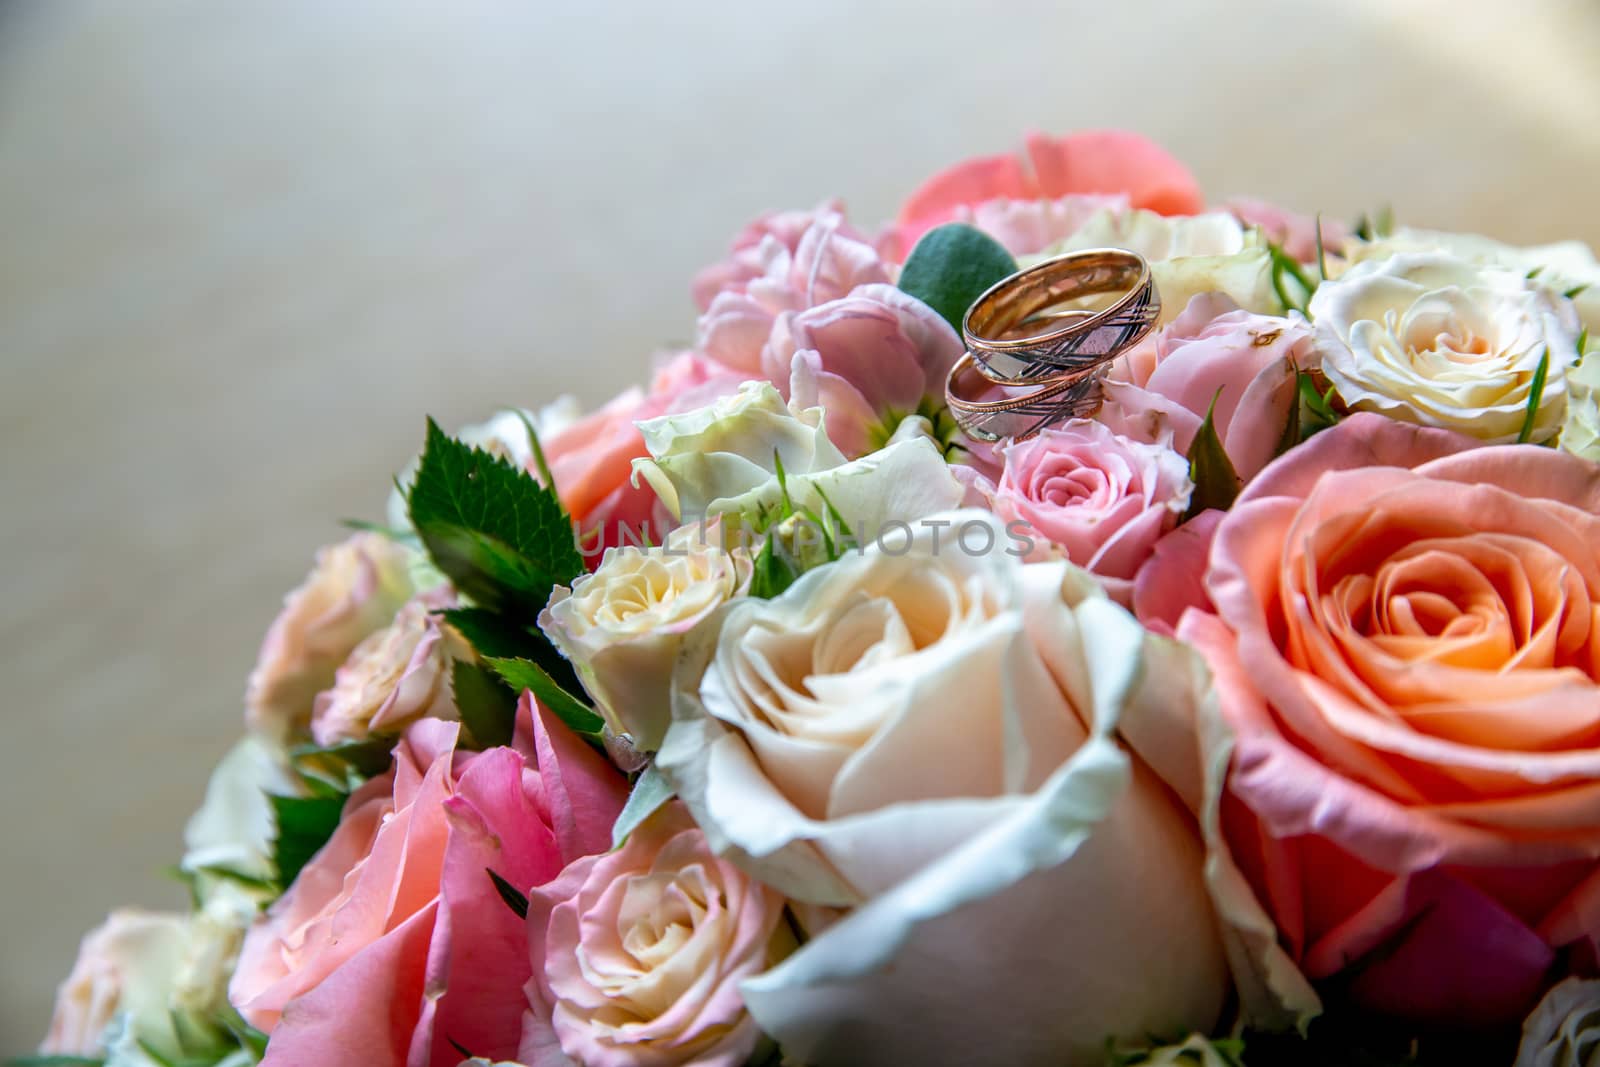 Wedding rings on the bouquet of roses. Wedding rings on bridal bouquet with colorful roses. Bouquet of bride with flowers and gold rings.

 